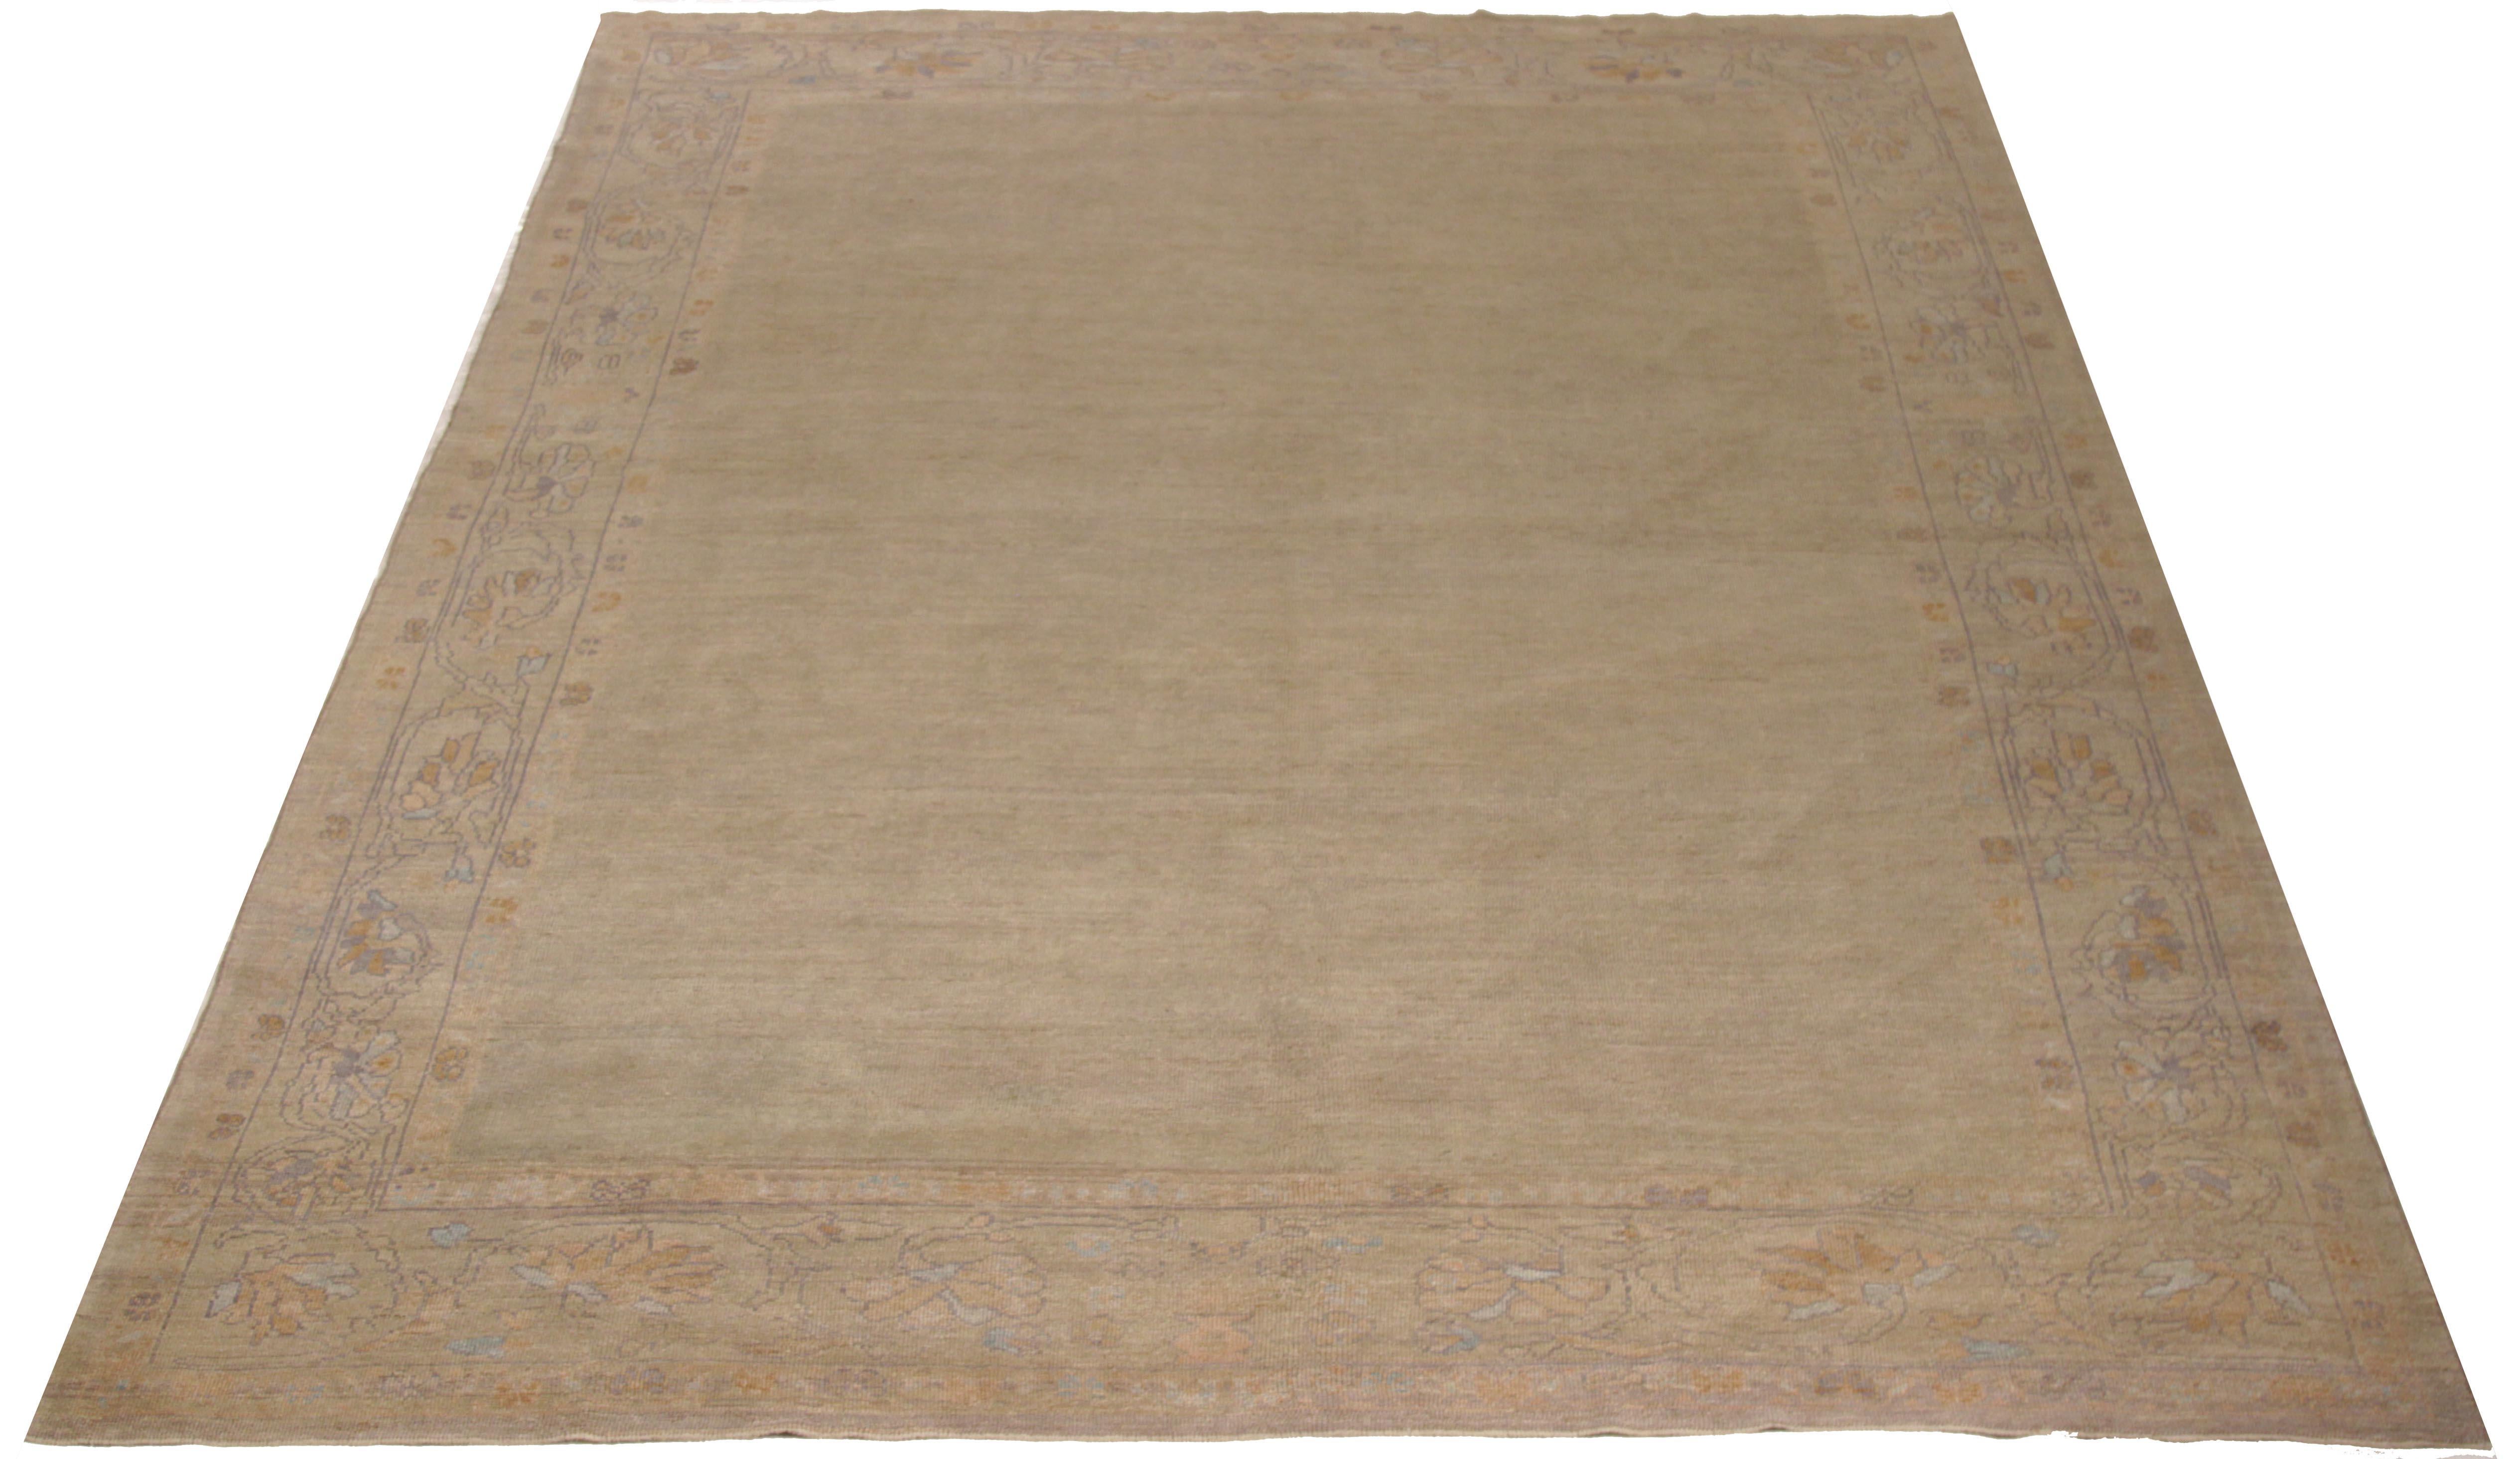 Persian rug handwoven from the finest sheep’s wool and colored with all-natural vegetable dyes that are safe for humans and pets. It exhibits a traditional Oushak design featuring a brown and beige mix field enclosed by an intricate flower-patterned